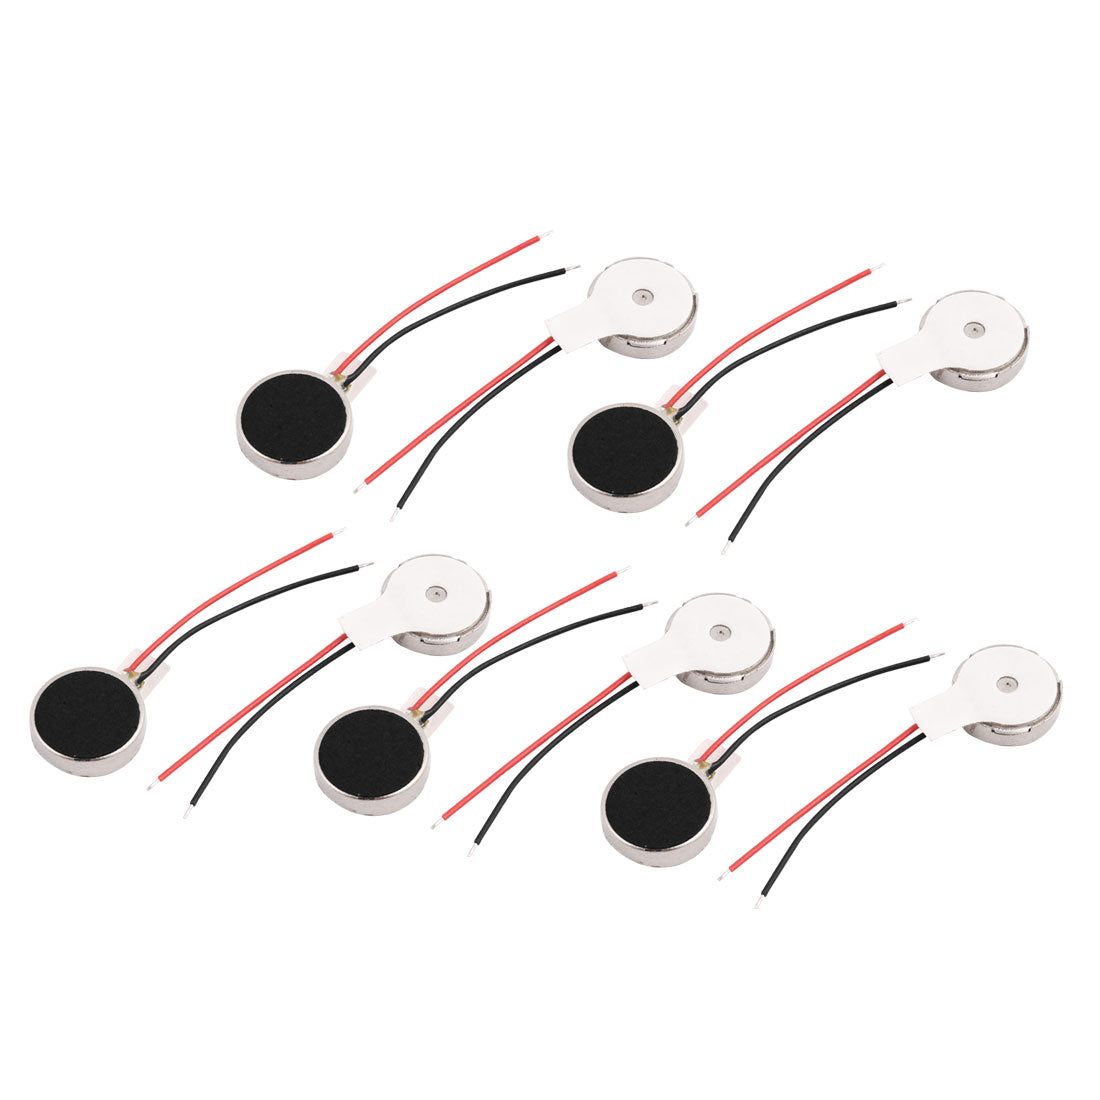 uxcell Uxcell 10 Pcs DC 3V 10mm Dia Mobile Phone Coin Flat Vibrating Vibration Motor w Wire